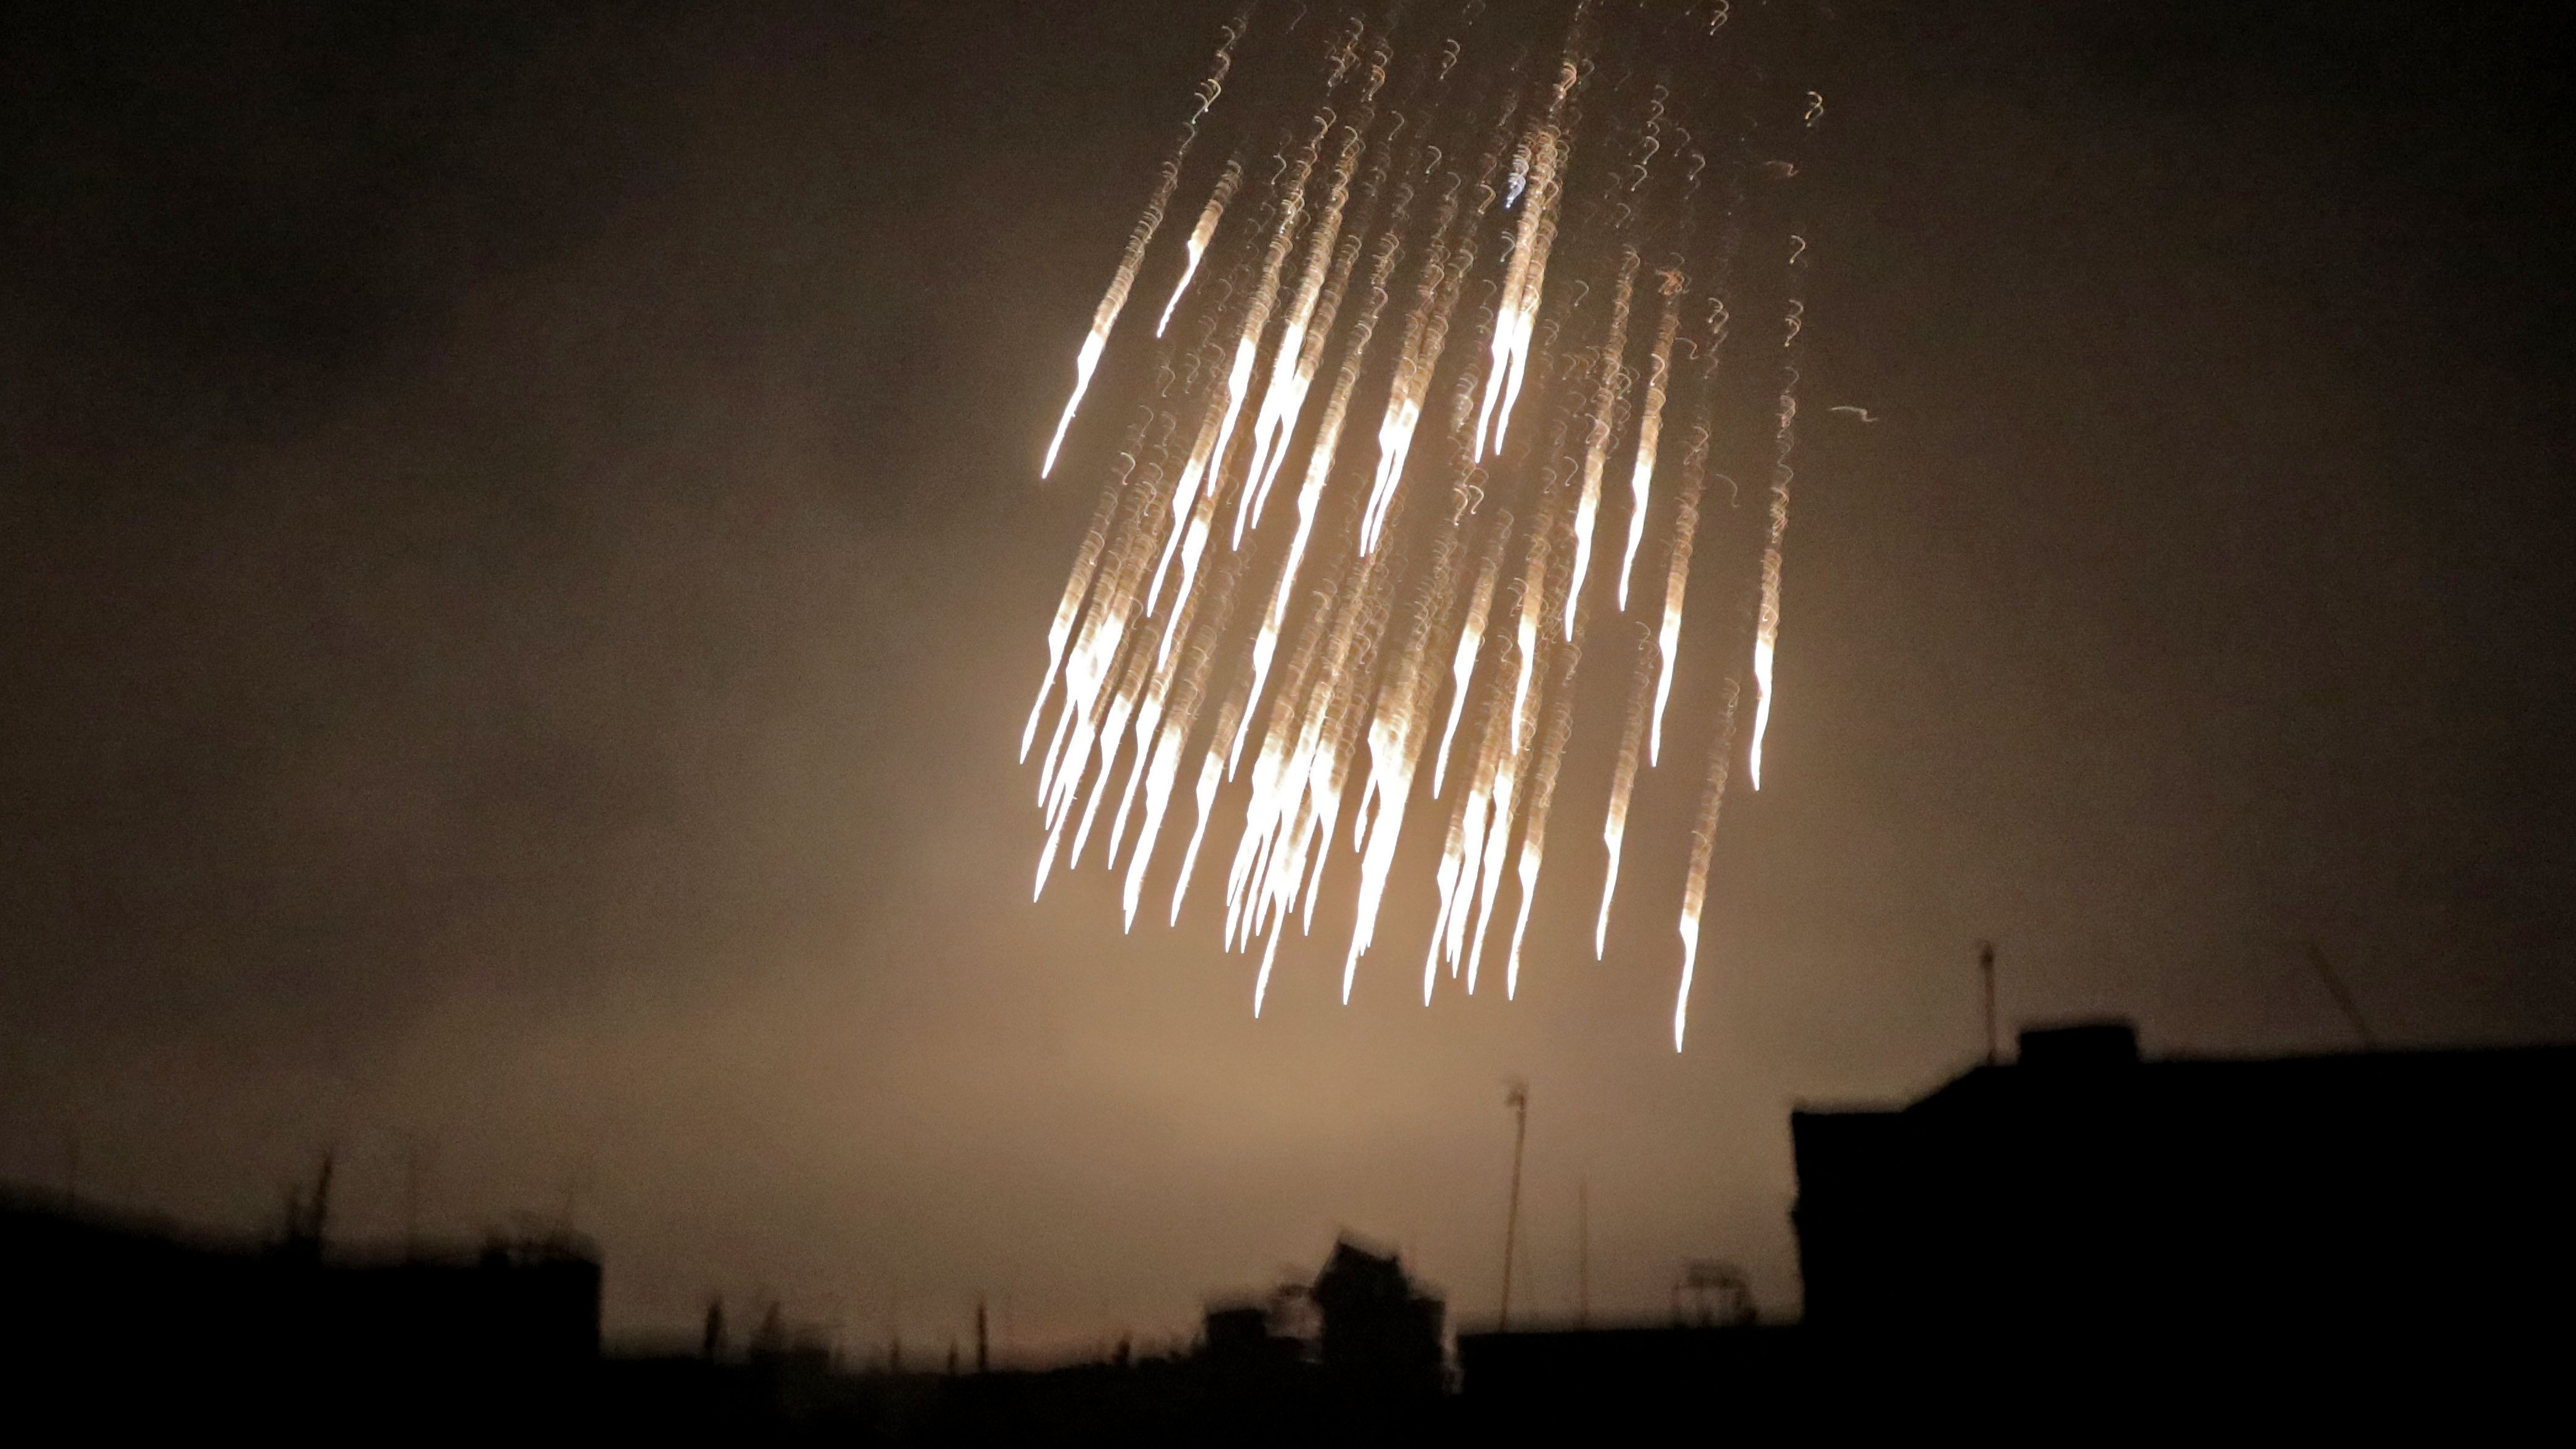 White phosphorus being dropped by the Assad regime in Douma, Syria